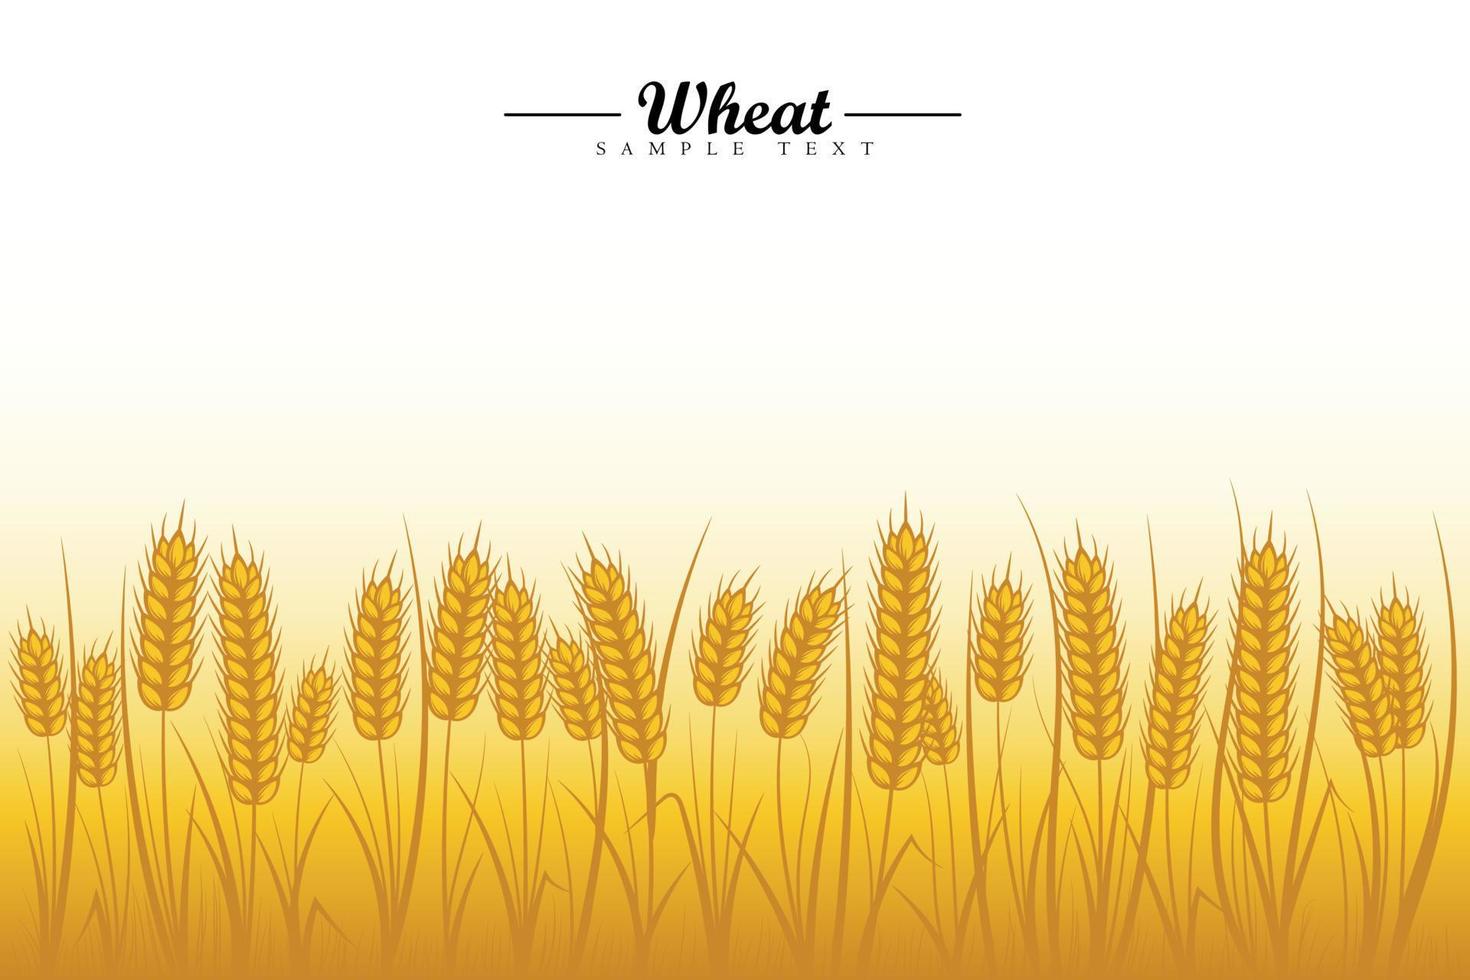 Wheat field background. Golden wheat ears of cereals with wheat tree and wheat leaf on white background vector